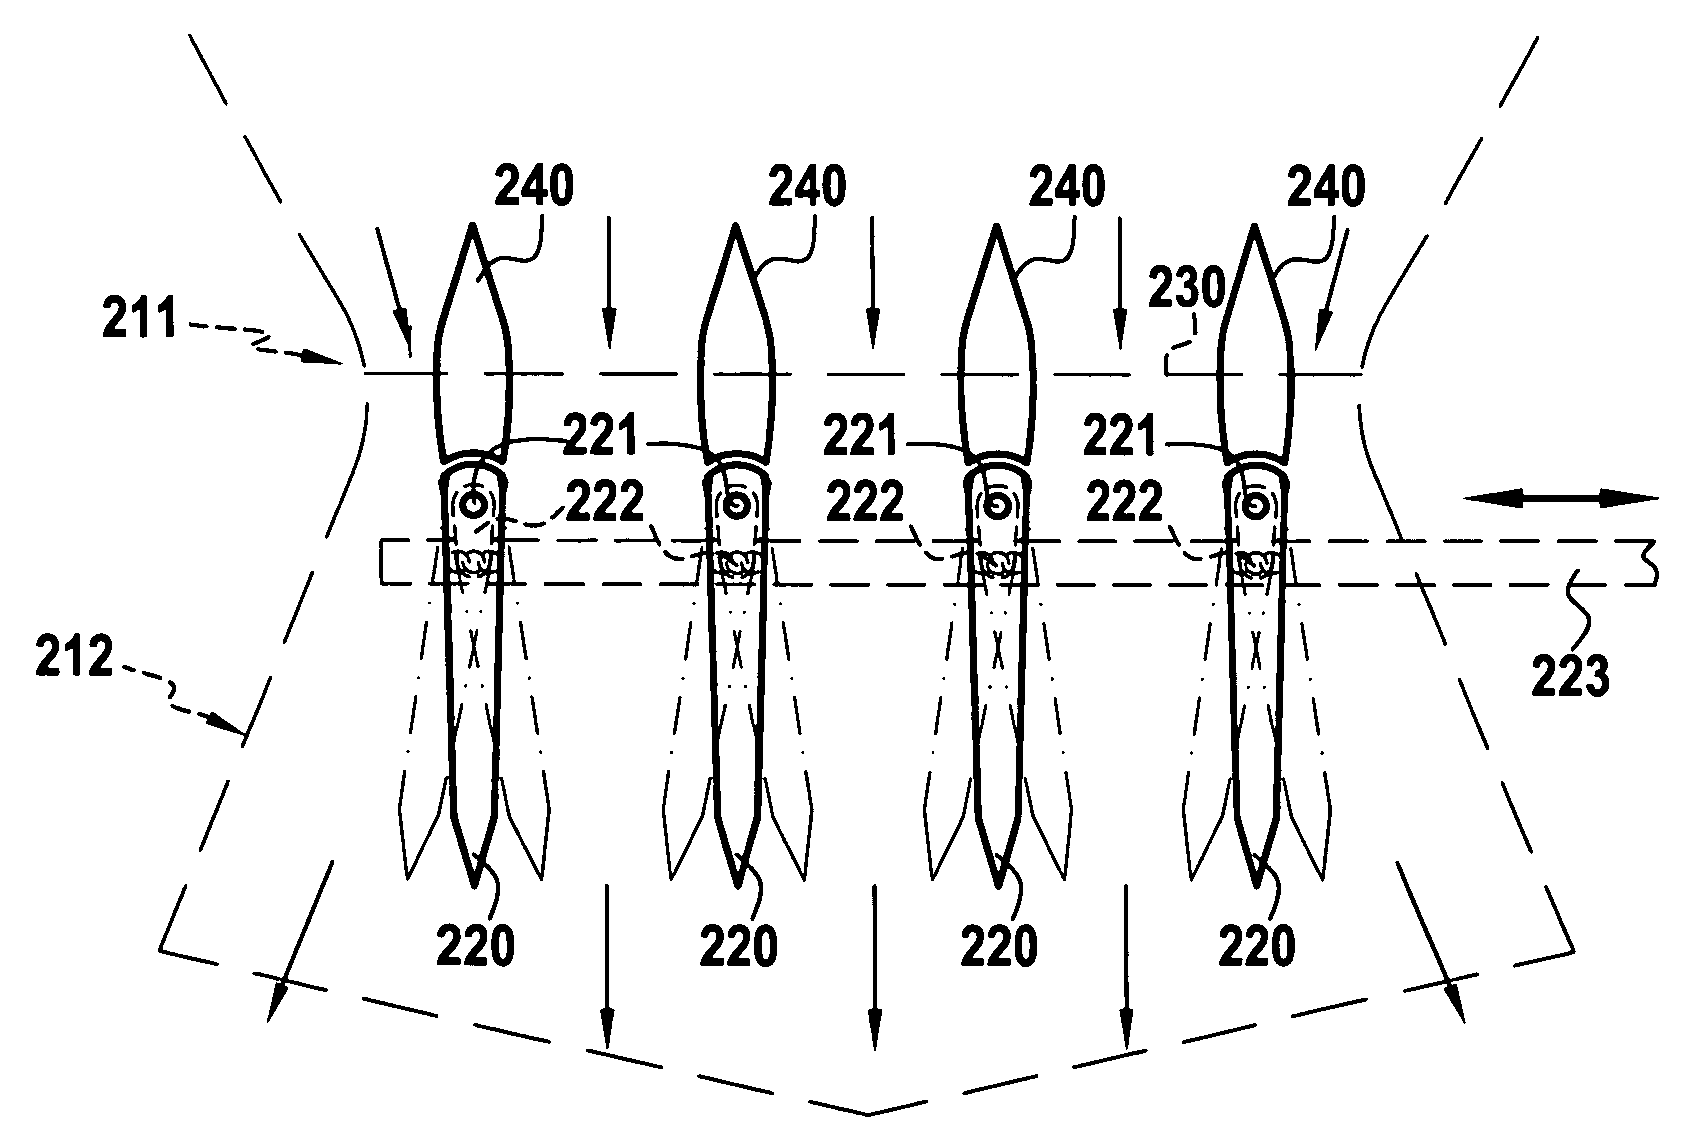 Yaw control device for a nozzle having a rectangular outlet section